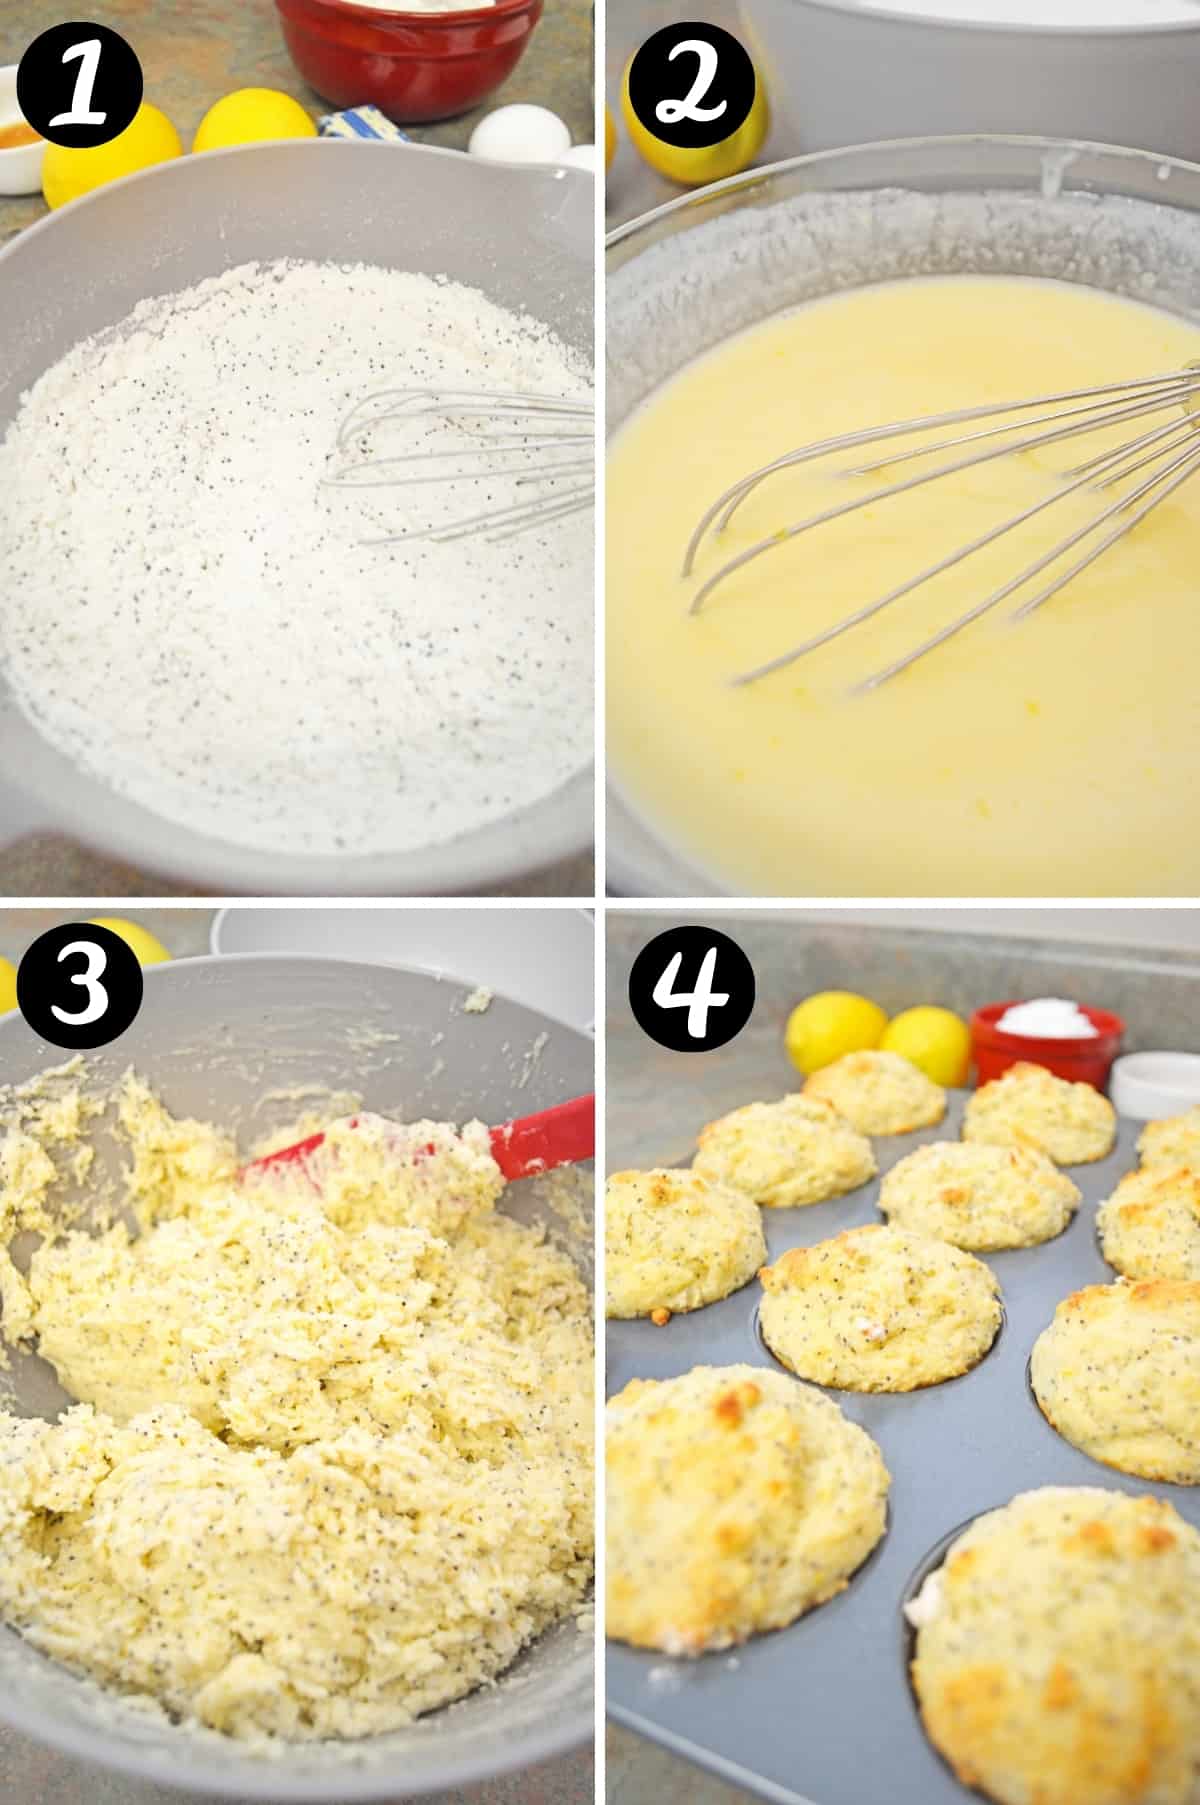 4 image collage with numbered pictures. Picture one: dry ingredients mixed together with wire whisk in a bowl. Picture two: wet ingredients whisked together in another mixing bowl. Picture three: thick lemon poppy seed muffin batter in mixing bowl. Picture four: baked muffins in muffin tin